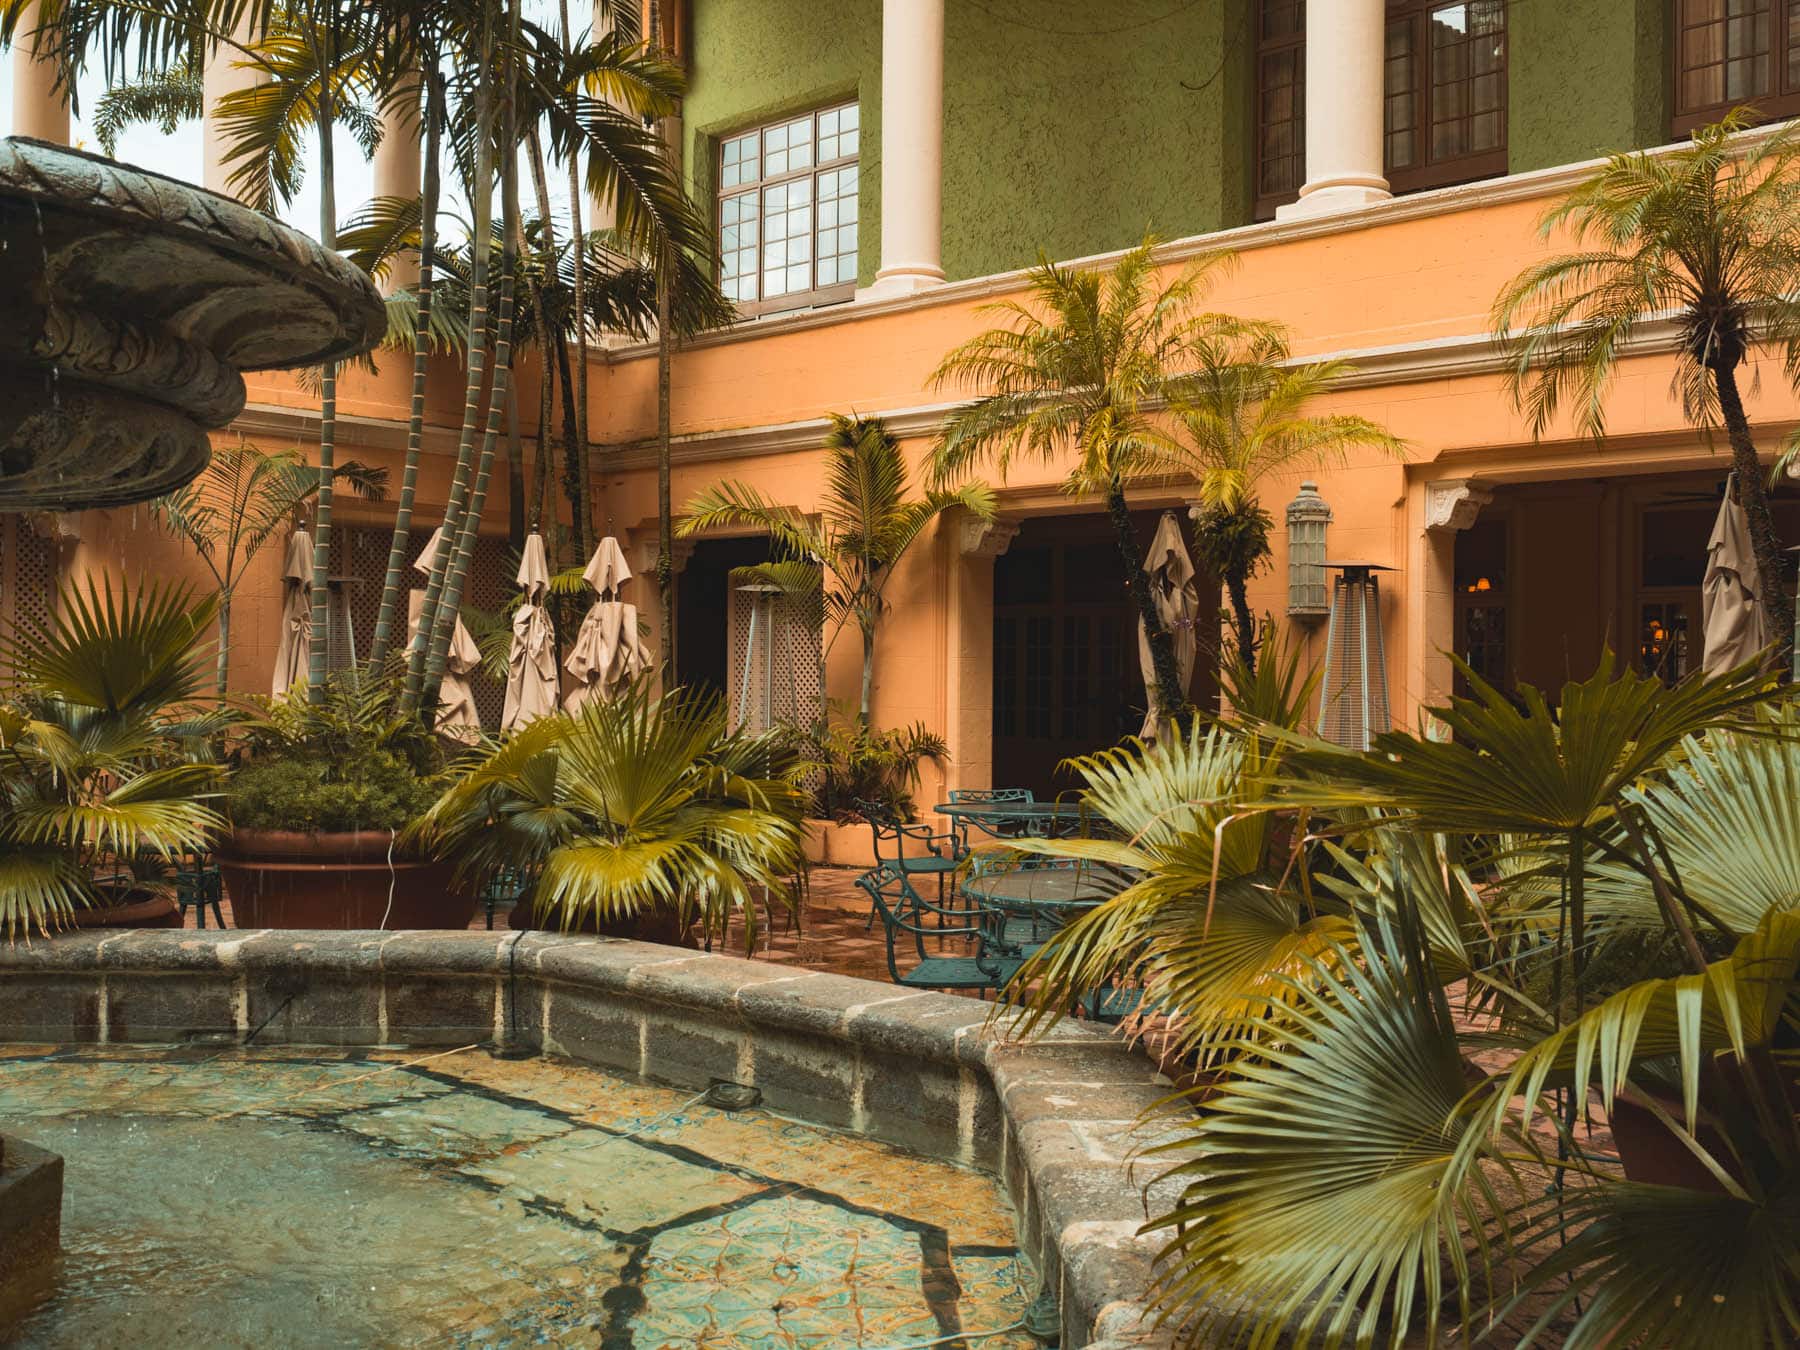 The Biltmore Hotel Coral Gables - Must See in Miami